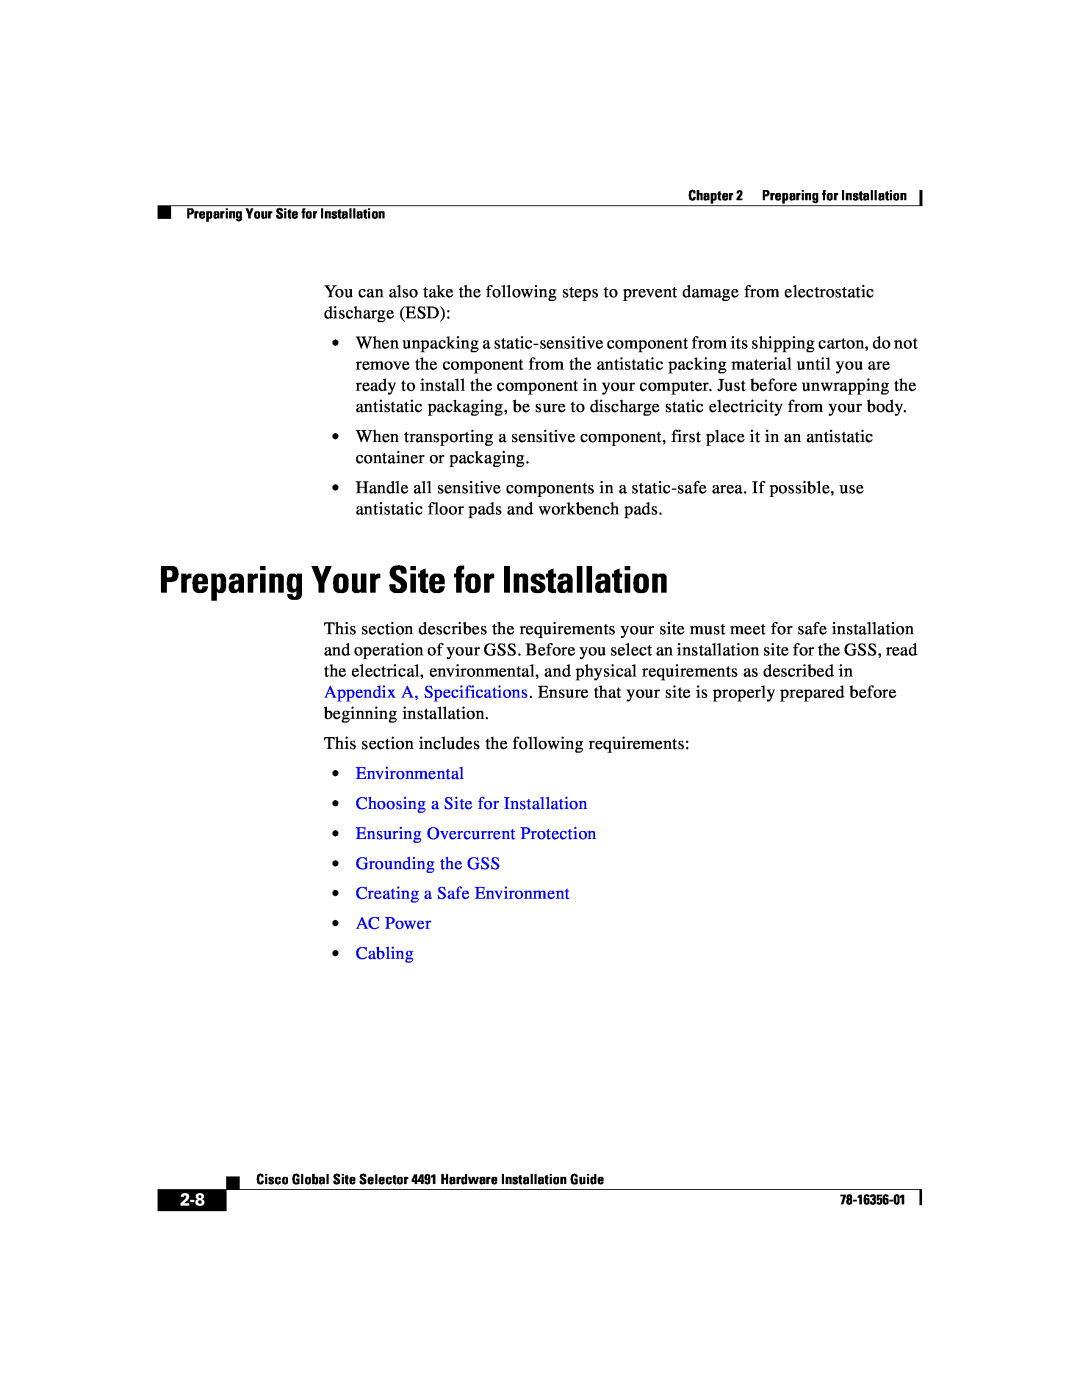 Cisco Systems 78-16356-01 manual Preparing Your Site for Installation, Environmental Choosing a Site for Installation 